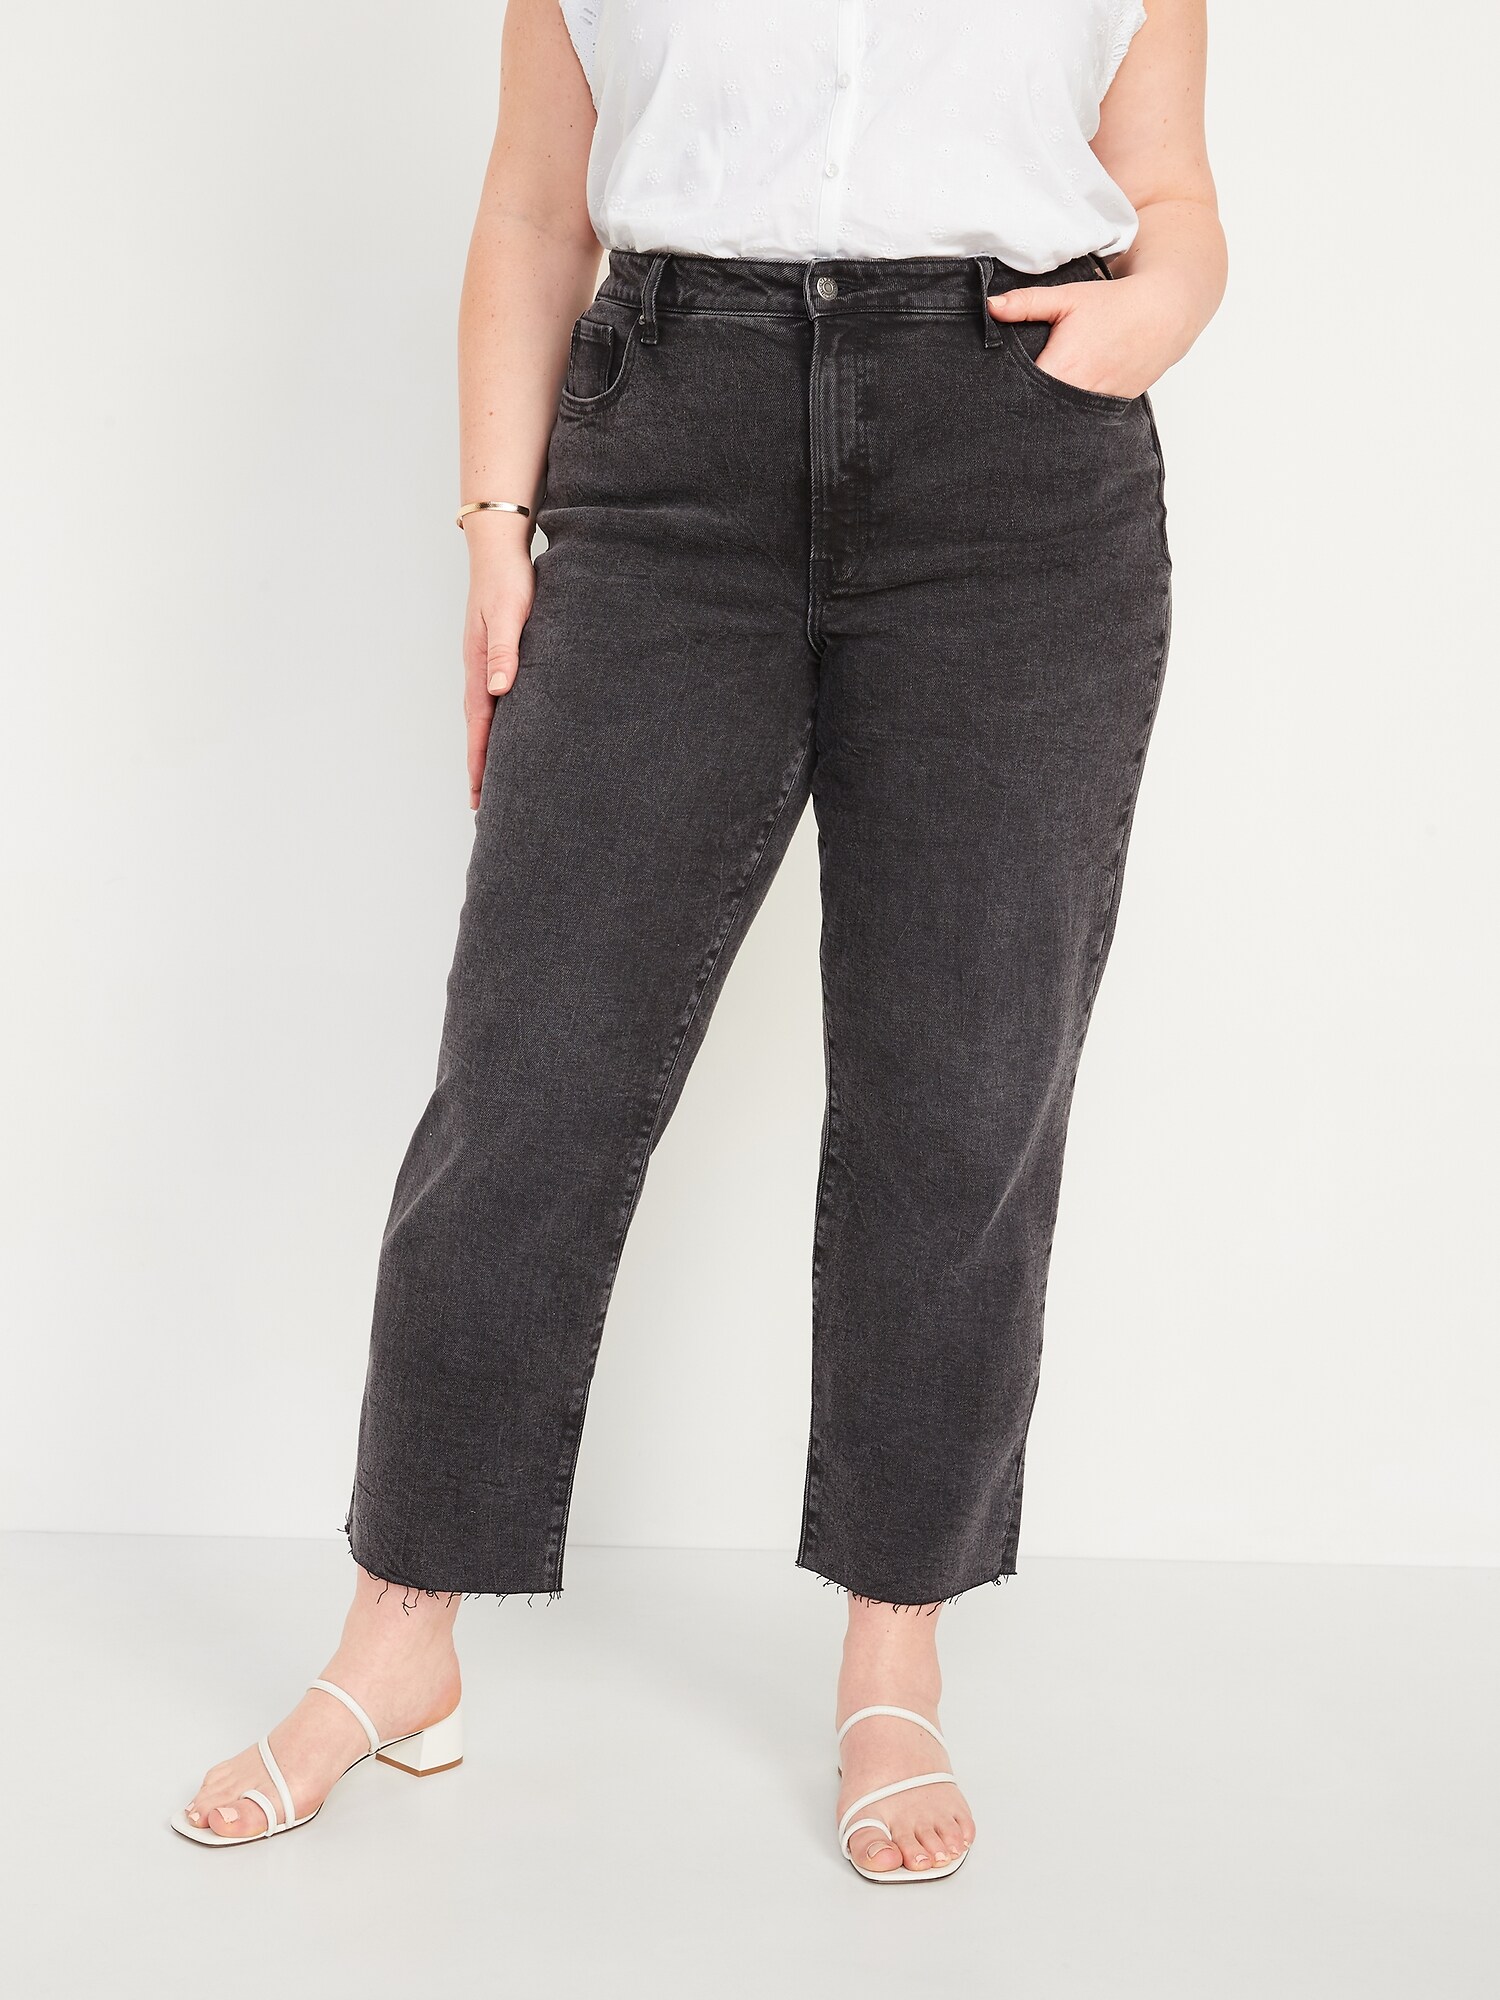 High-Waisted OG Loose Gray Cut-Off Jeans for Women | Old Navy